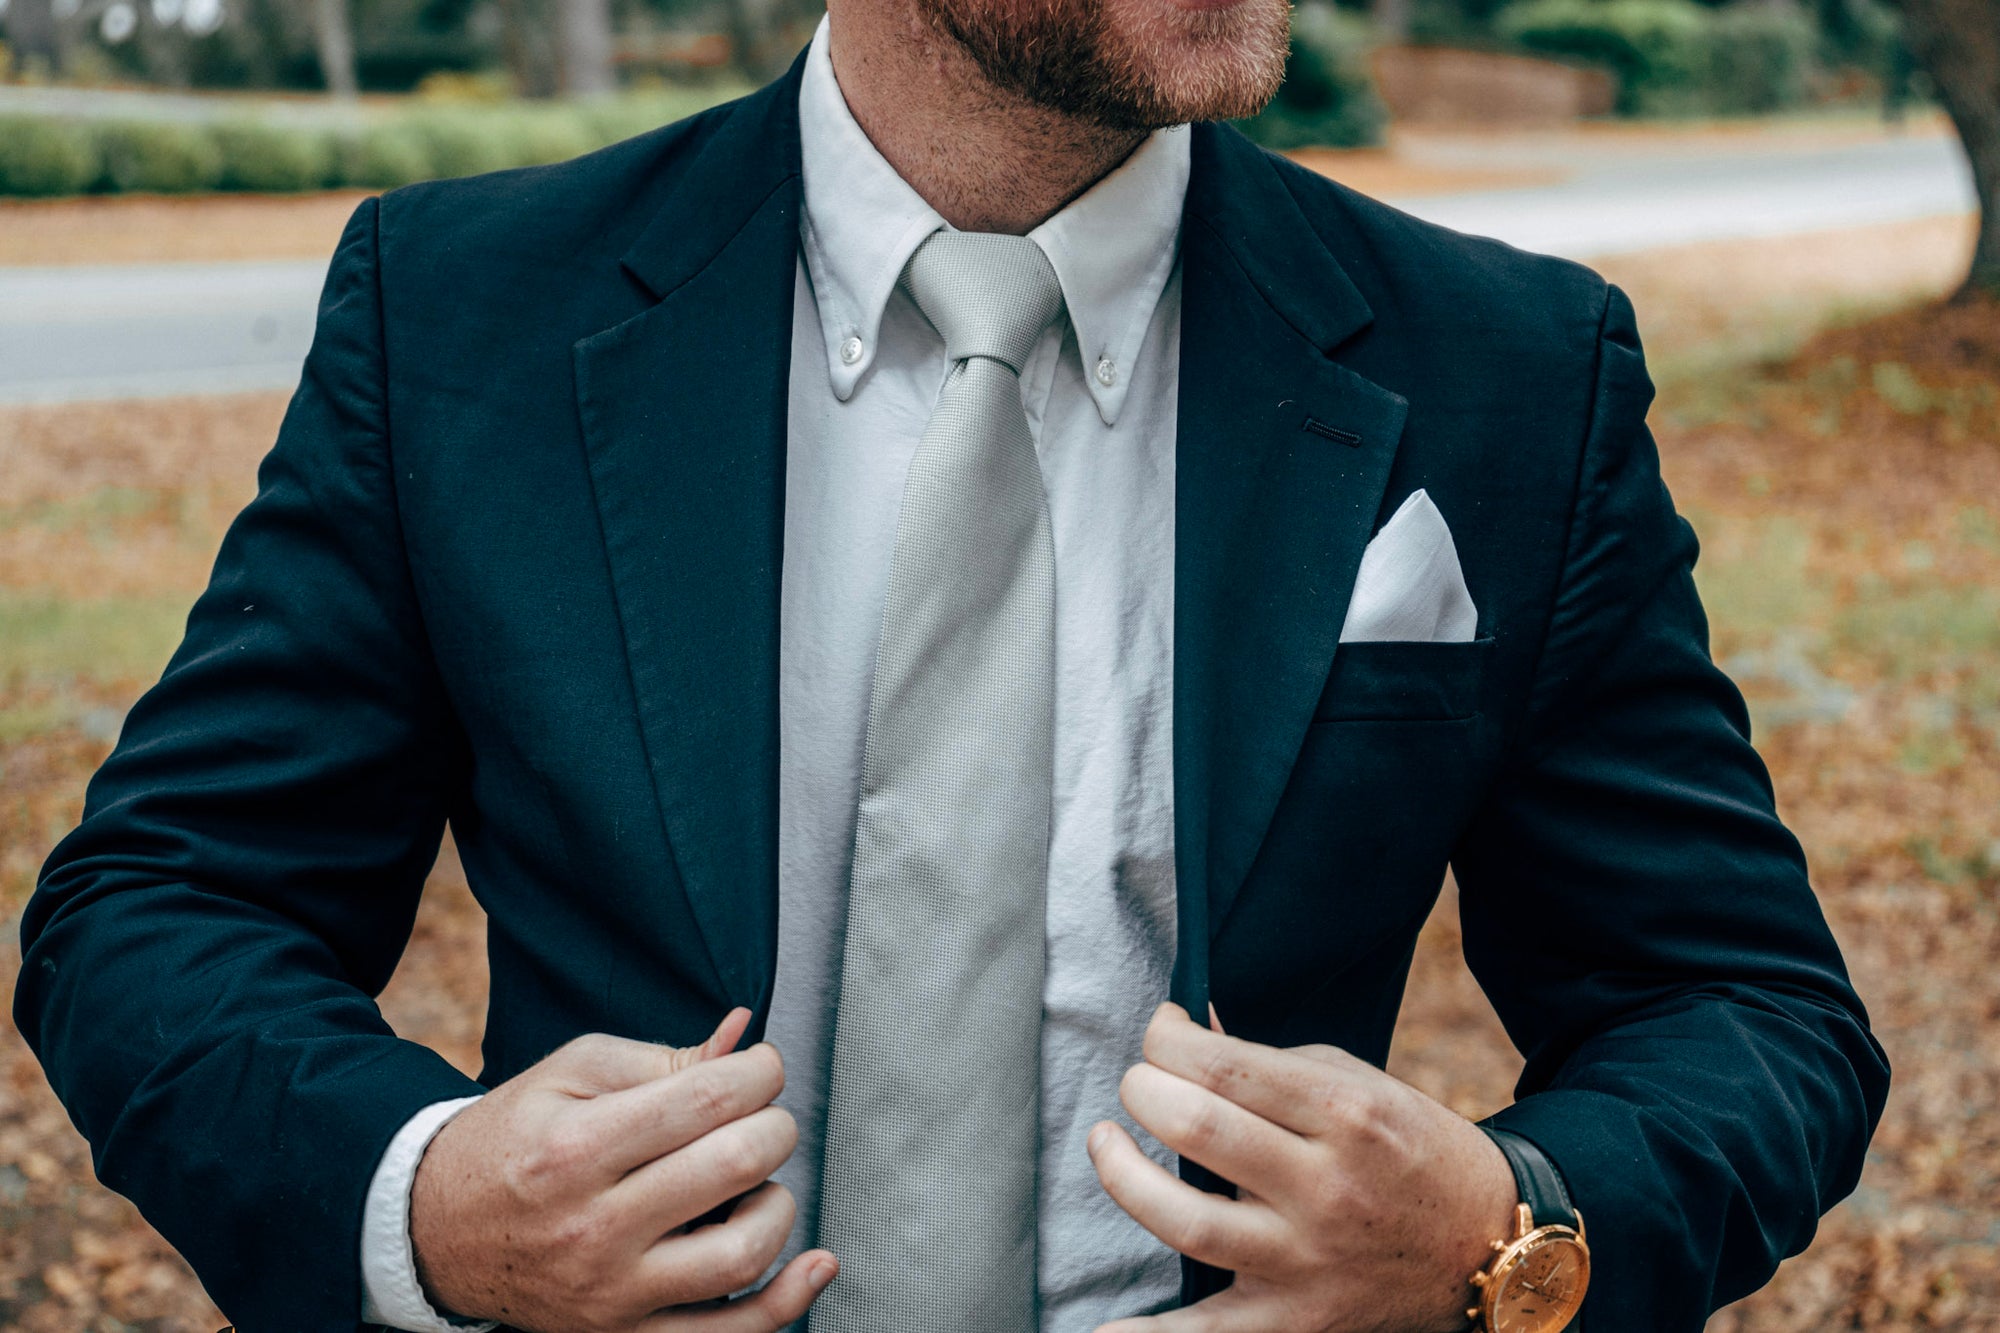 Streamlining Elegance: How to Wear a Tie, The Southern Way